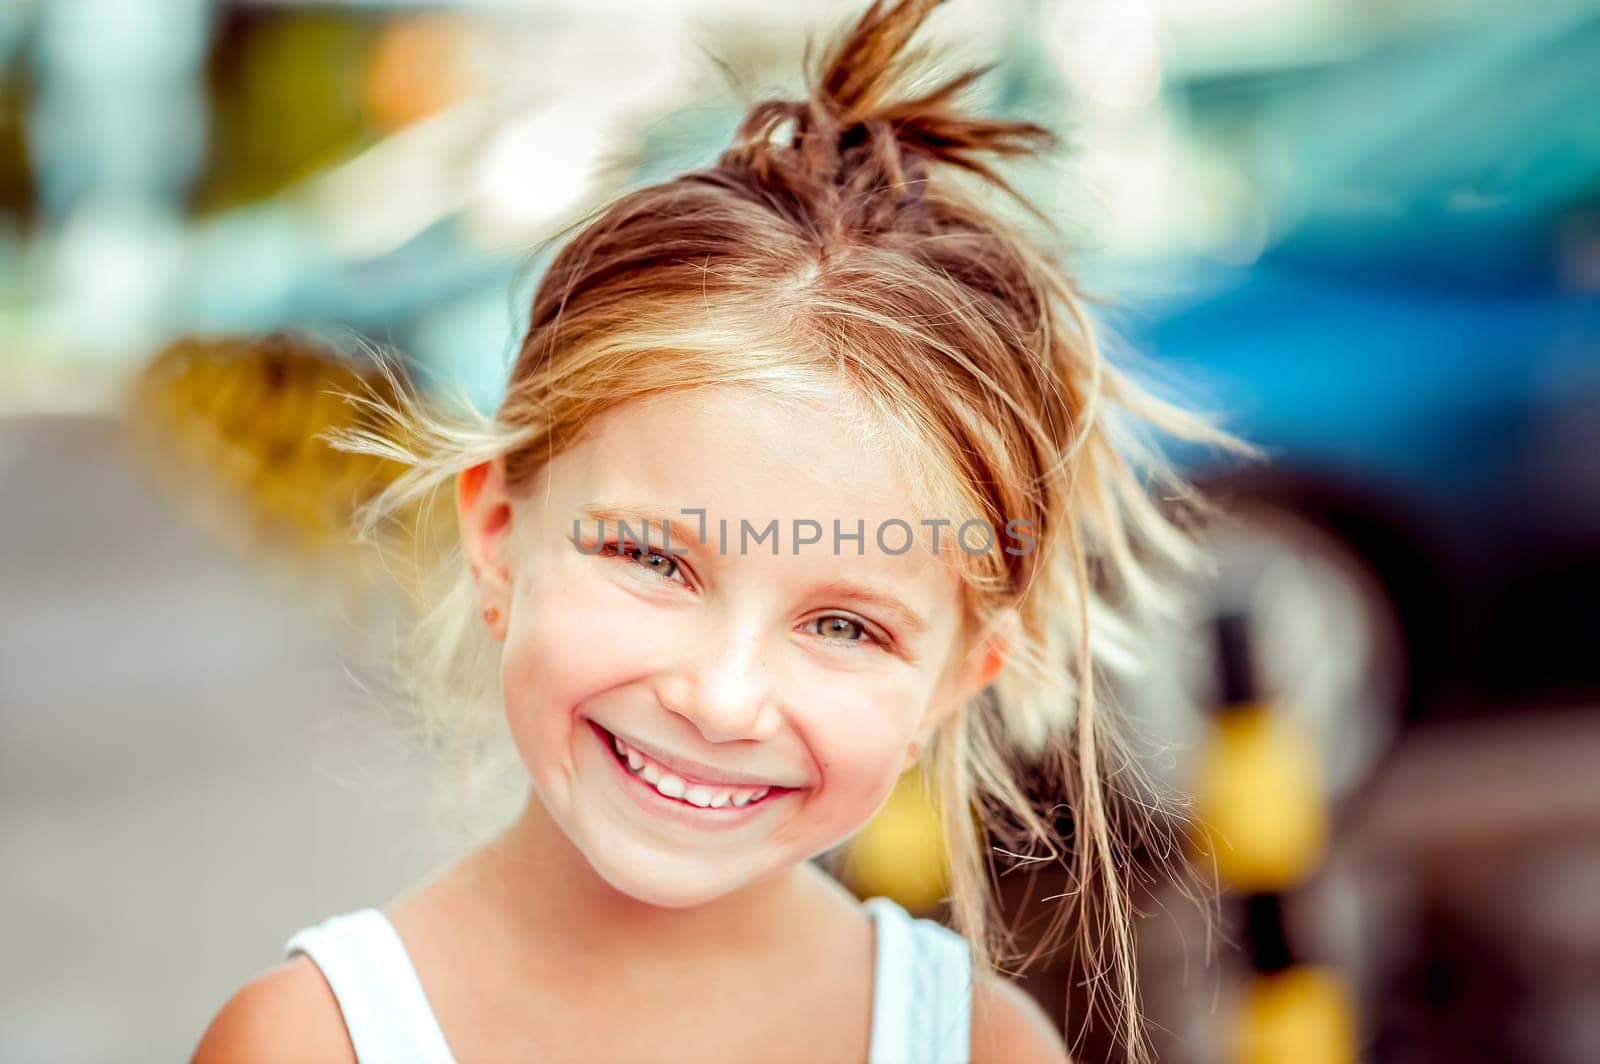 Portrait of a happy cute liitle girl close-up